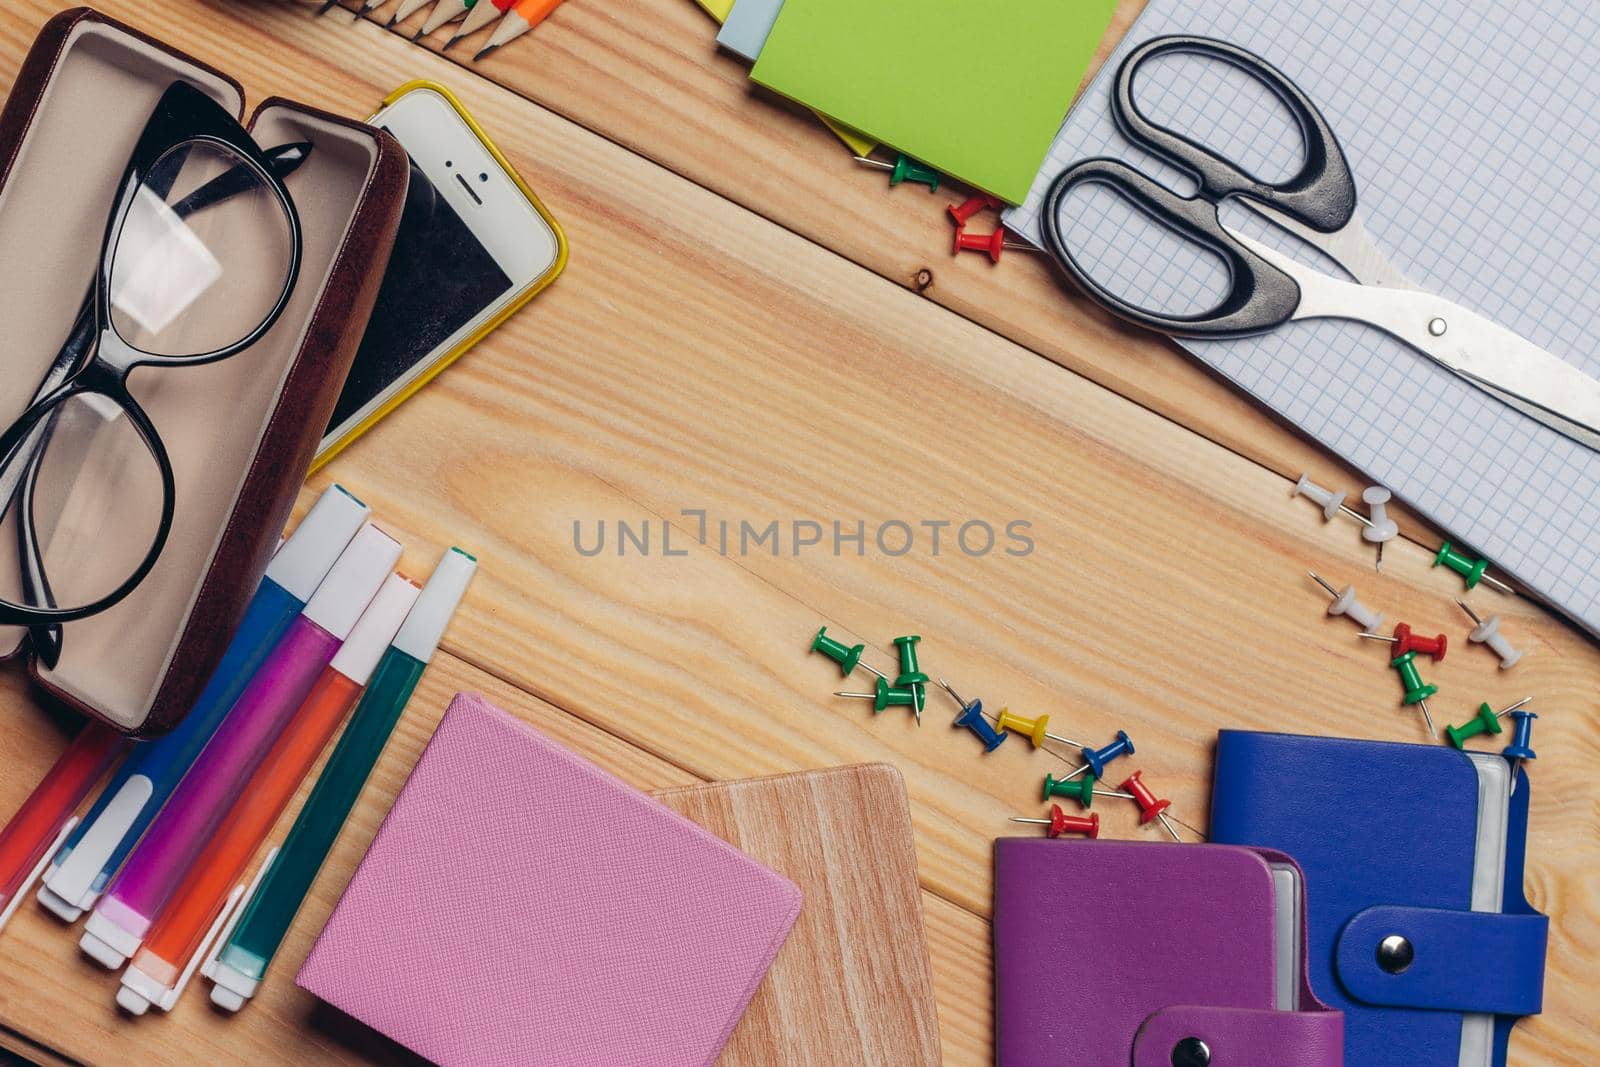 business card holders multicolored markers work desk stationery top view. High quality photo